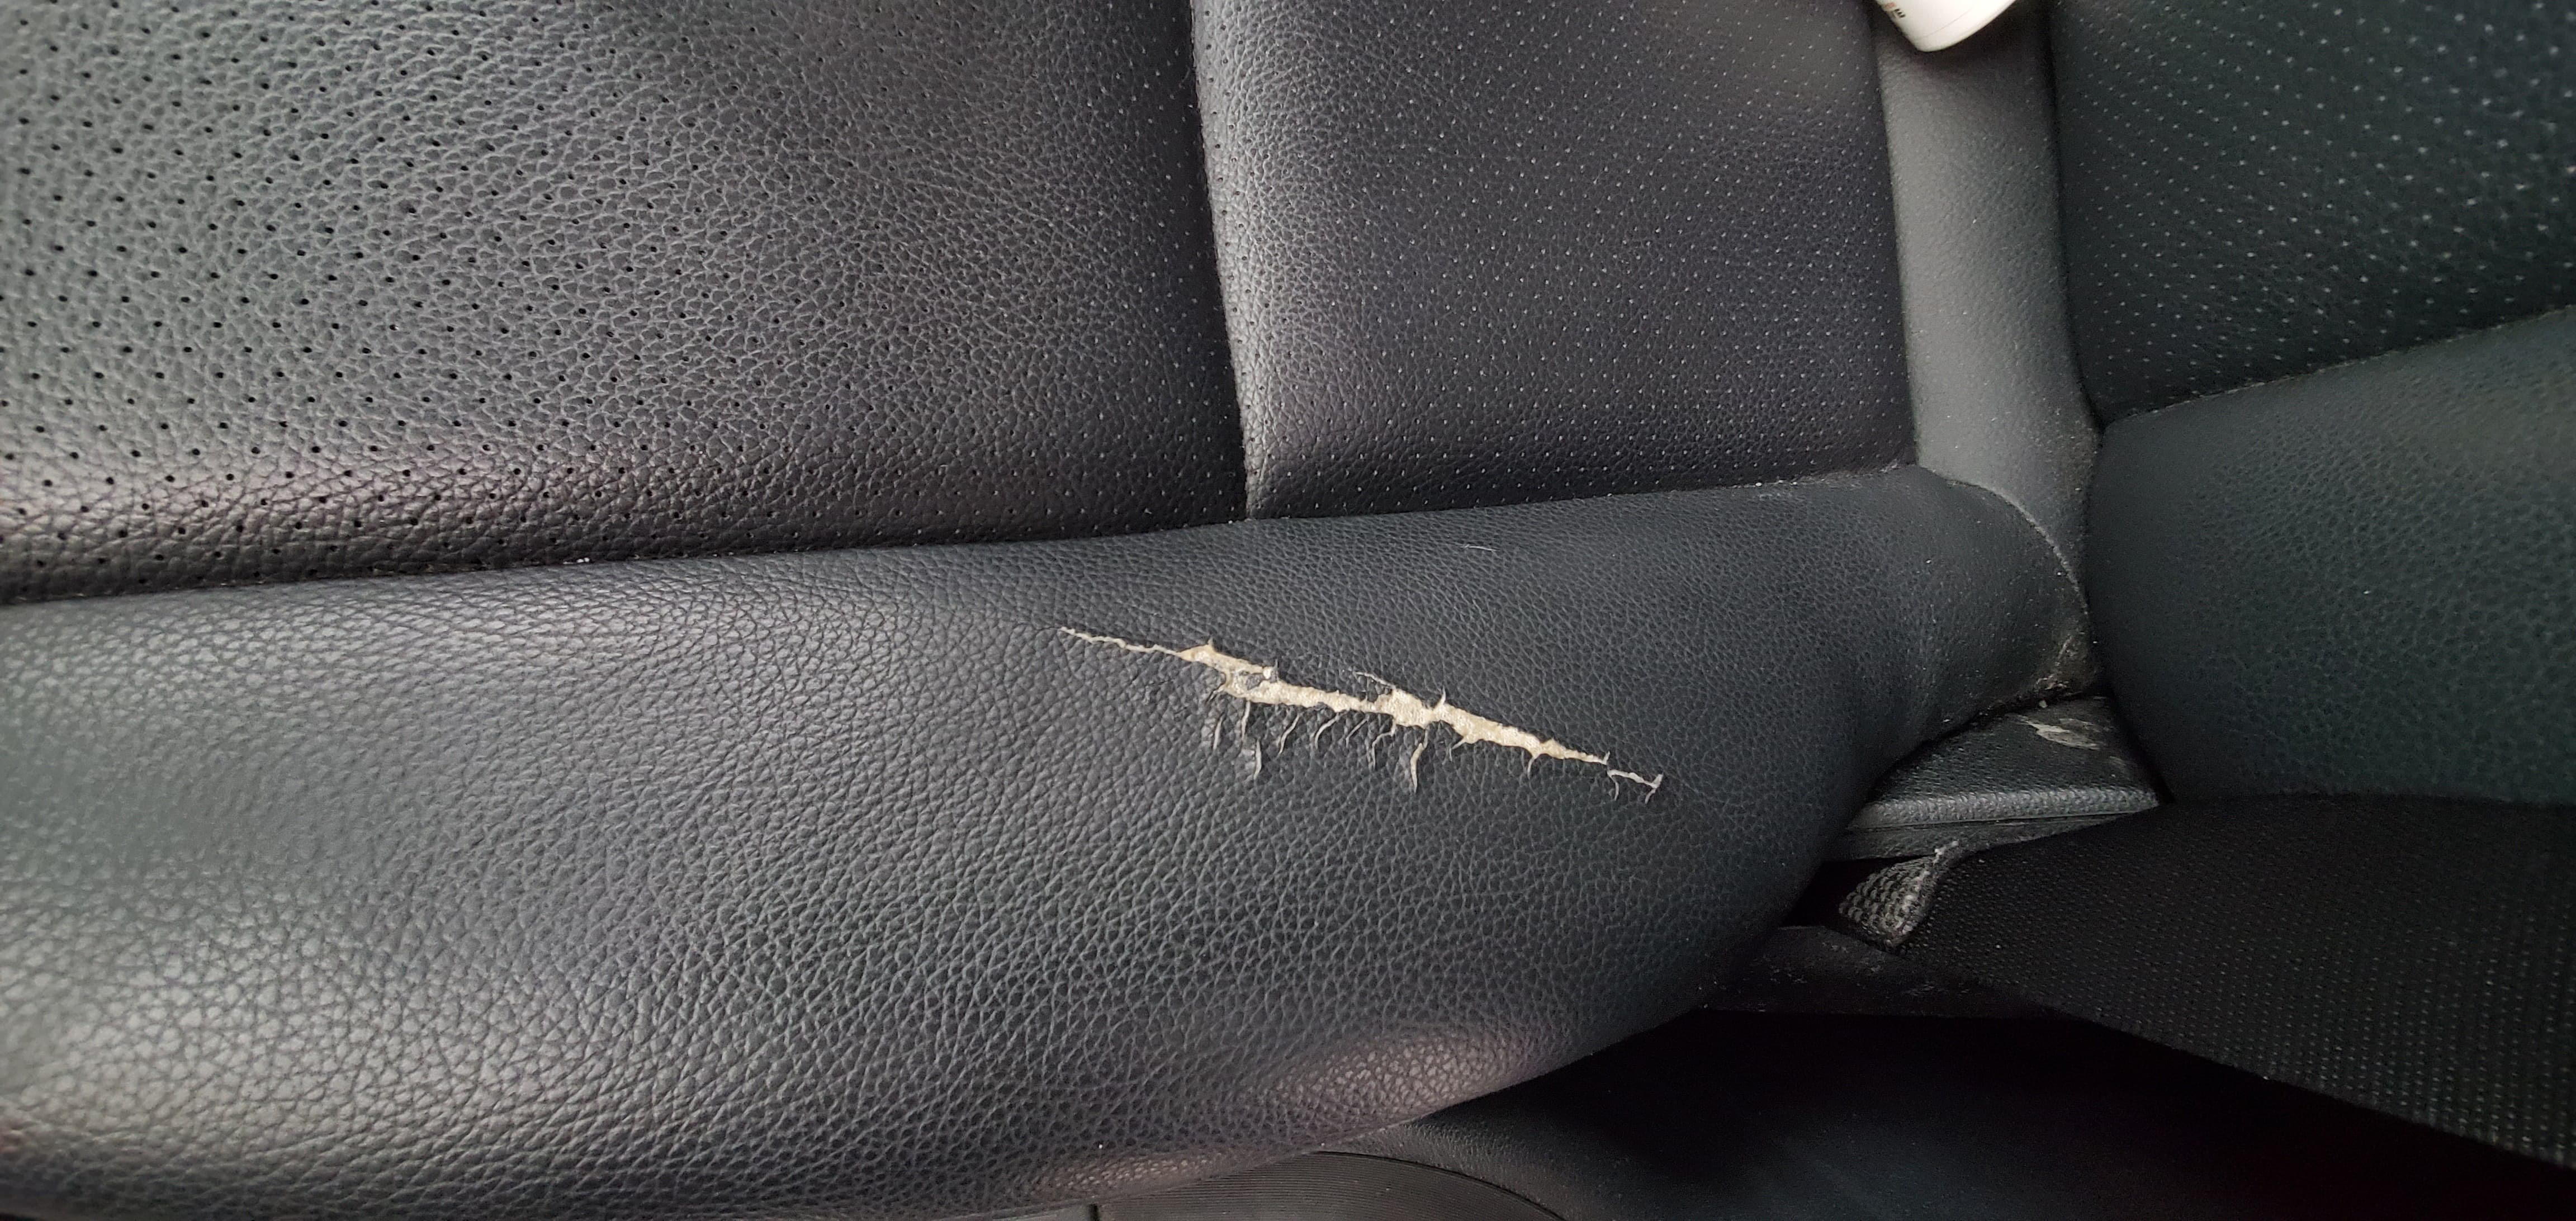 How To Repair A Leather Car Seat - How To Fix Small Hole In Leather Seat